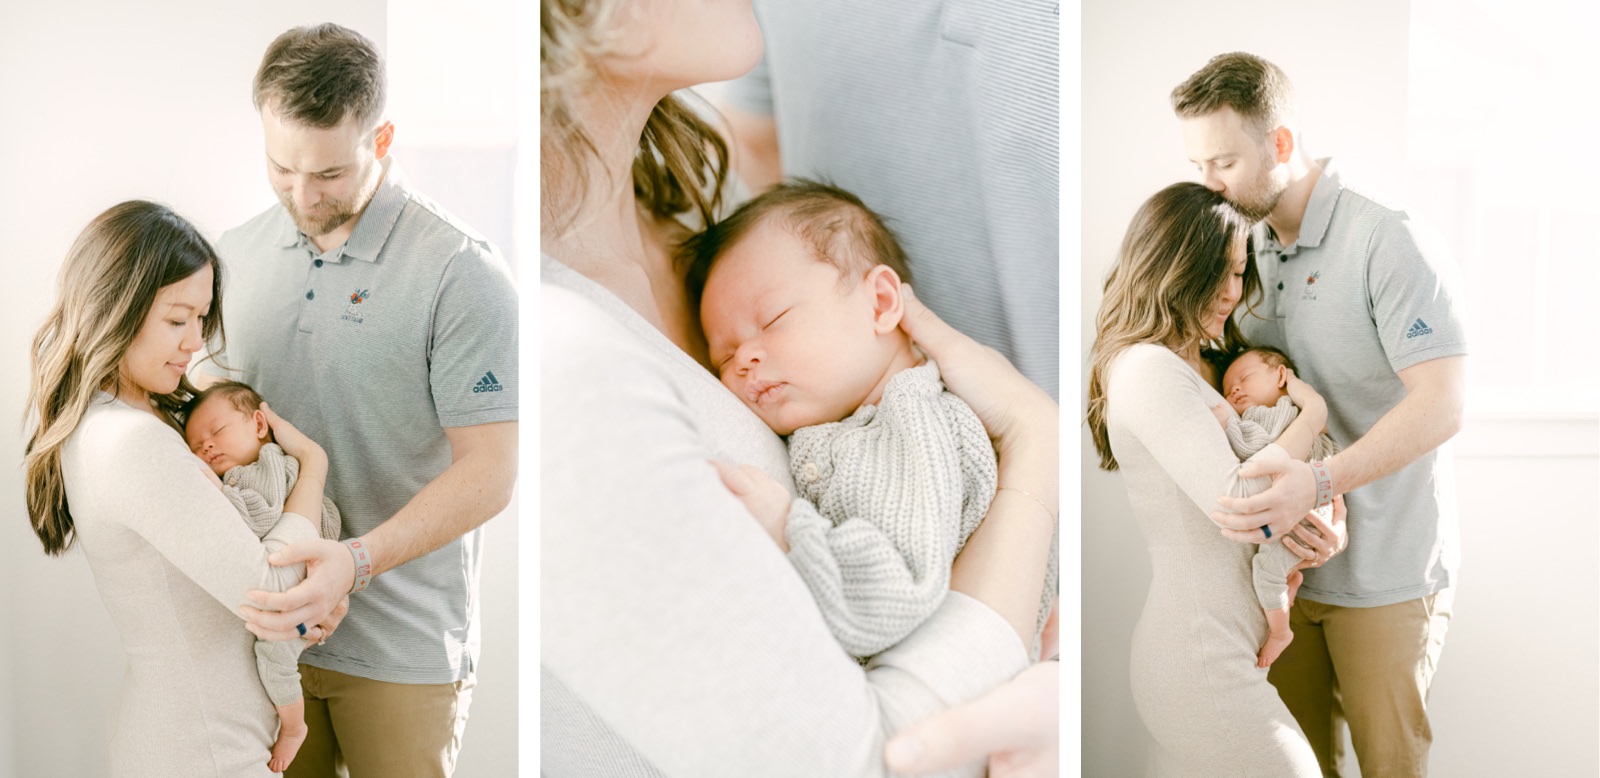 Erie Colorado Photographer taking an cuddly photo of a young family during a newborn session